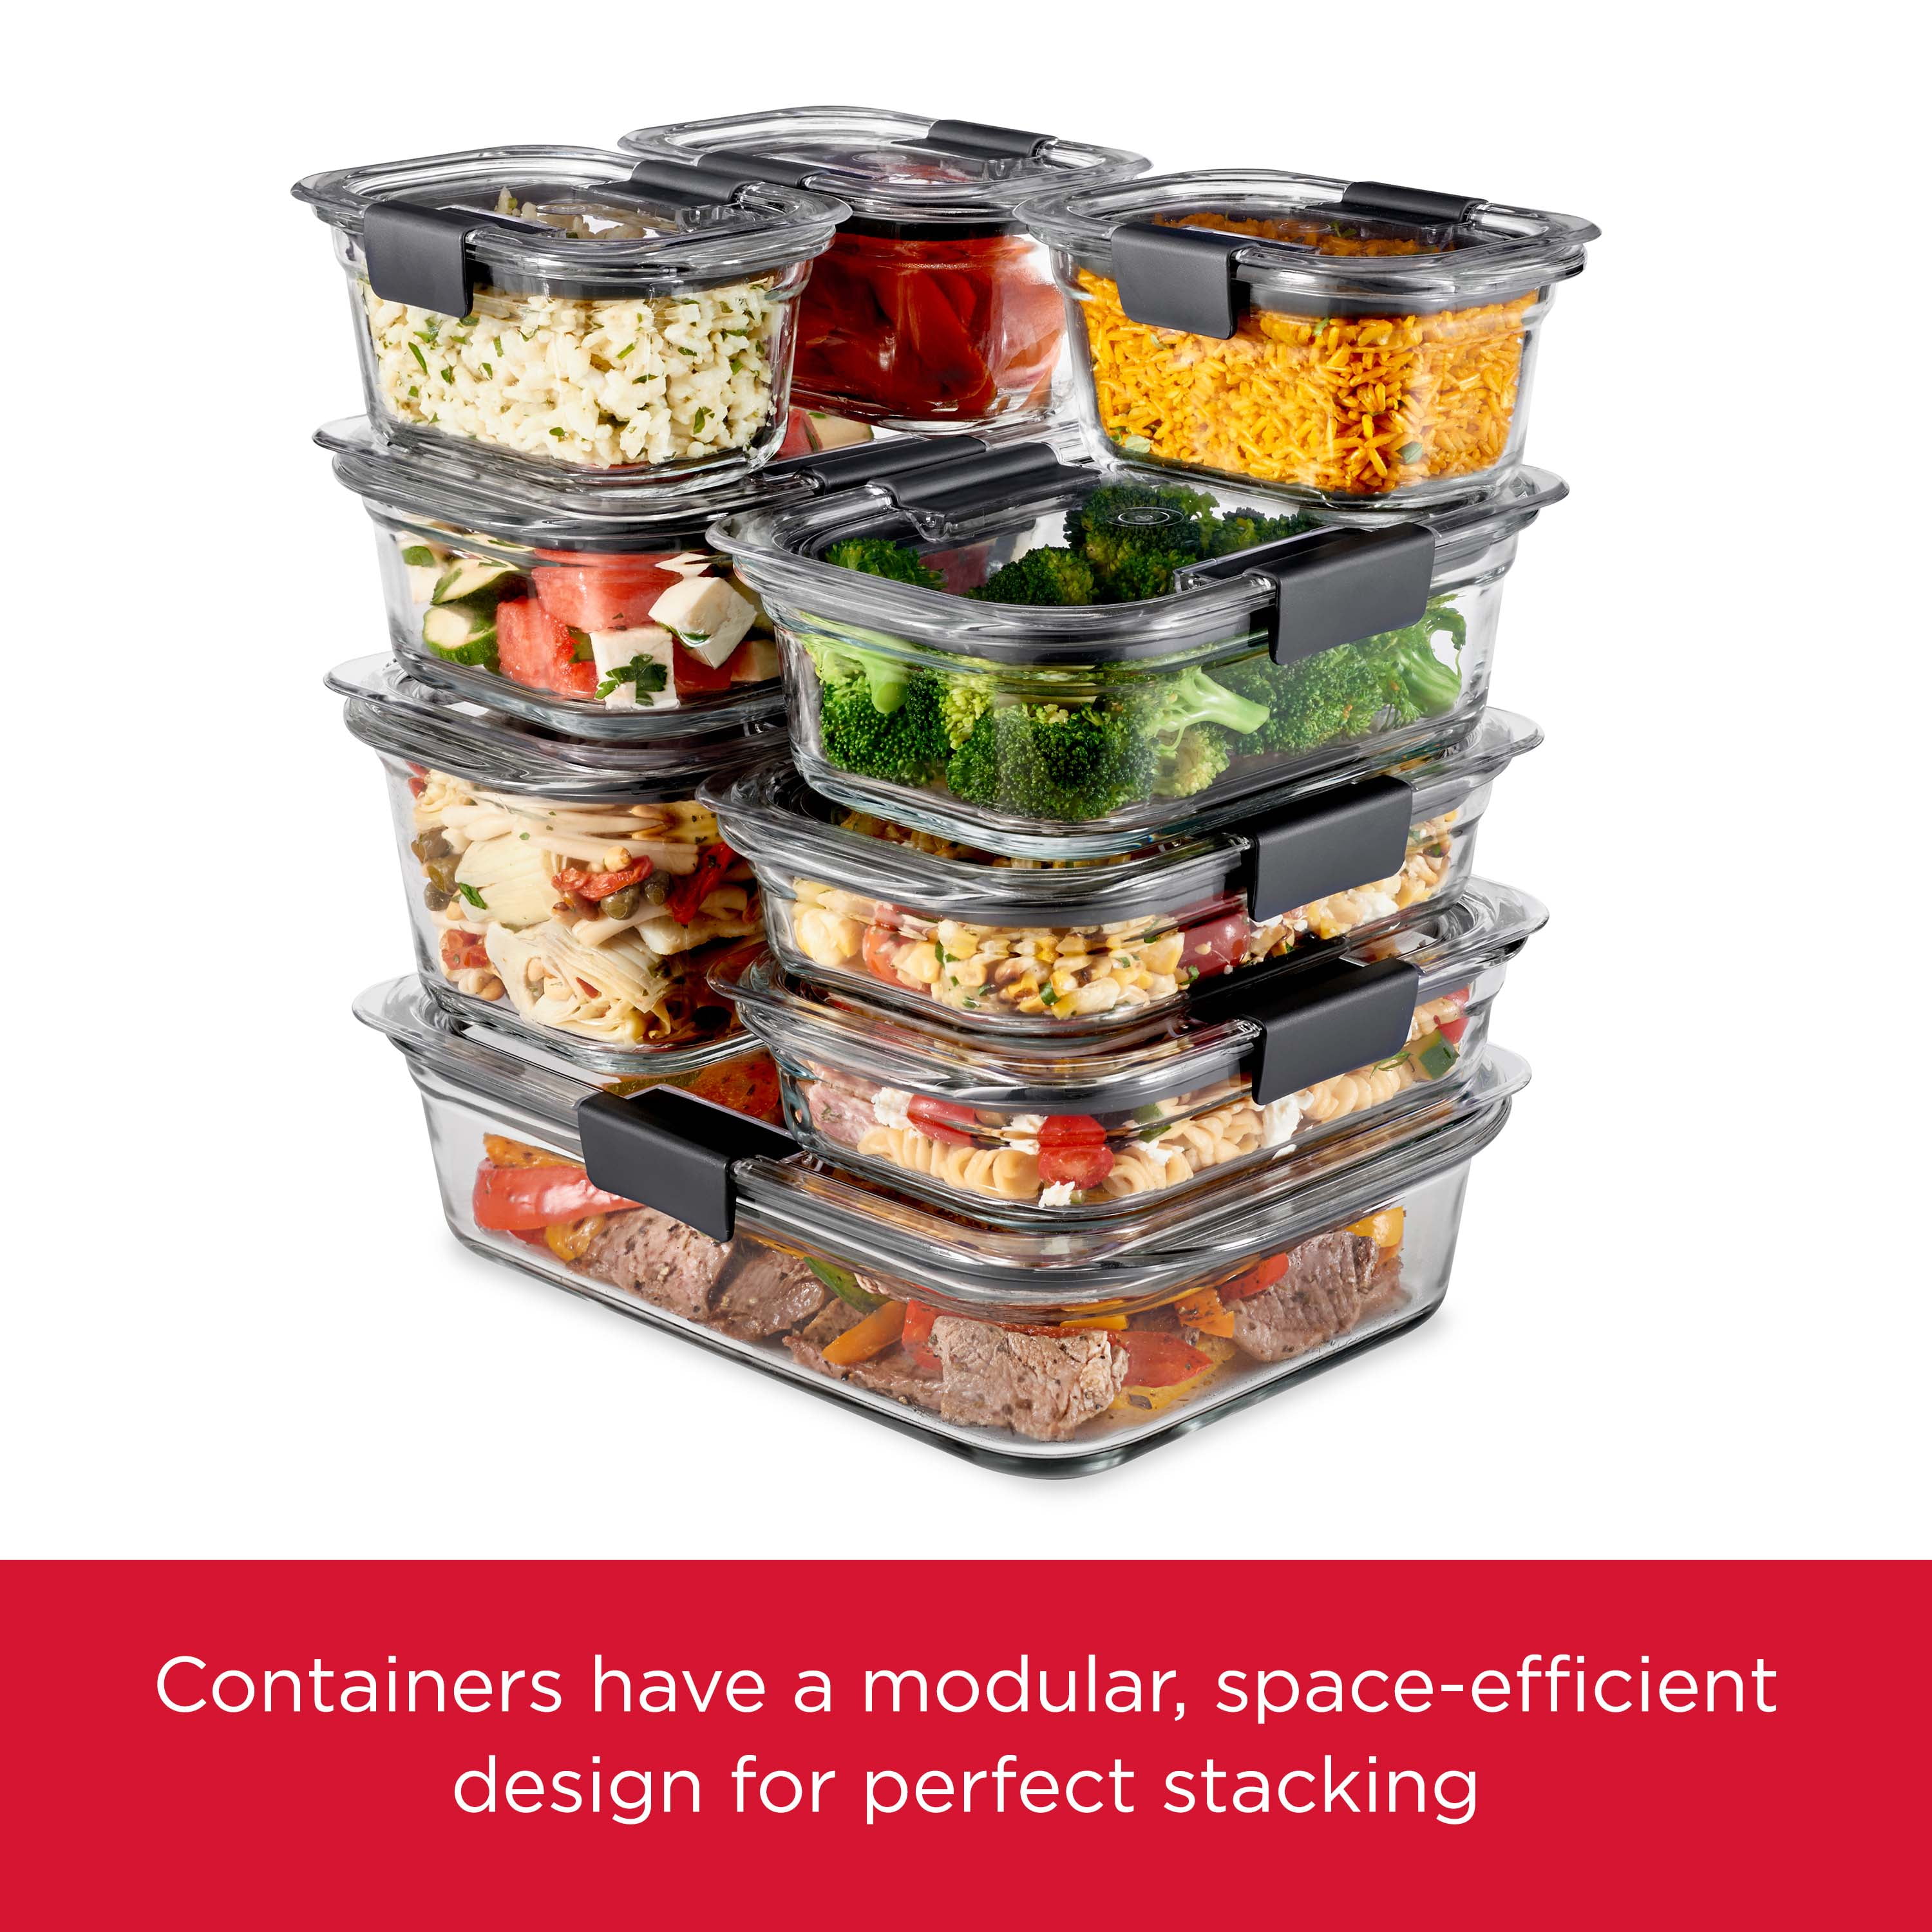 Rubbermaid 2125082 Food Container and Lid Brilliance Clear Clear